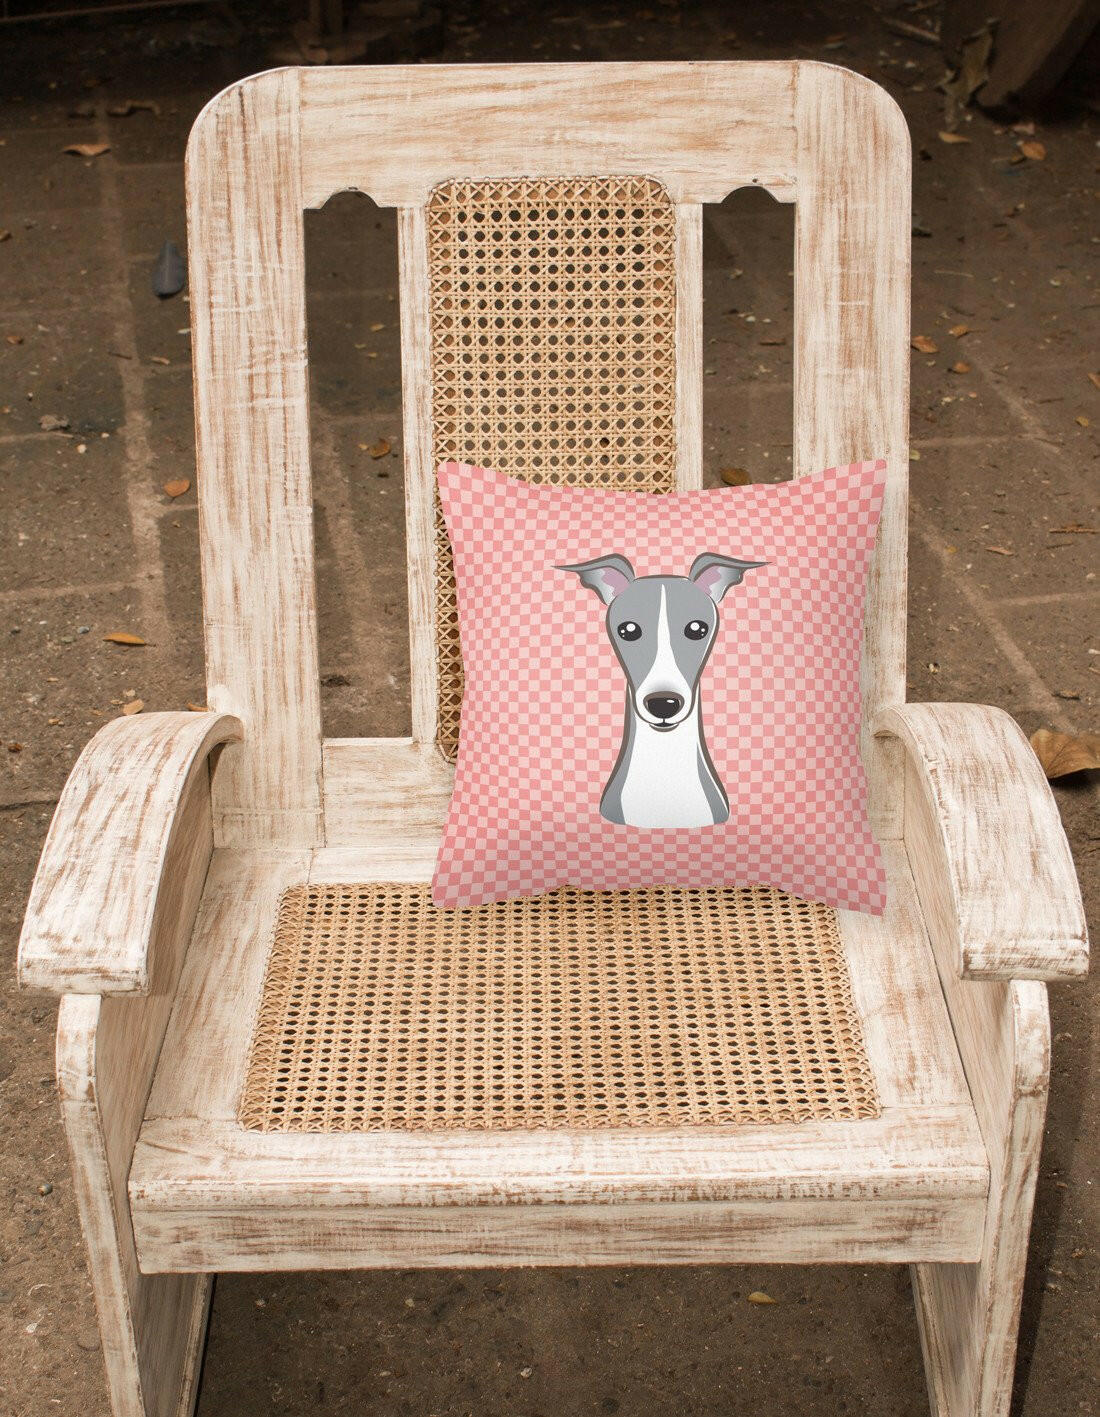 Checkerboard Pink Italian Greyhound Canvas Fabric Decorative Pillow BB1236PW1414 - the-store.com